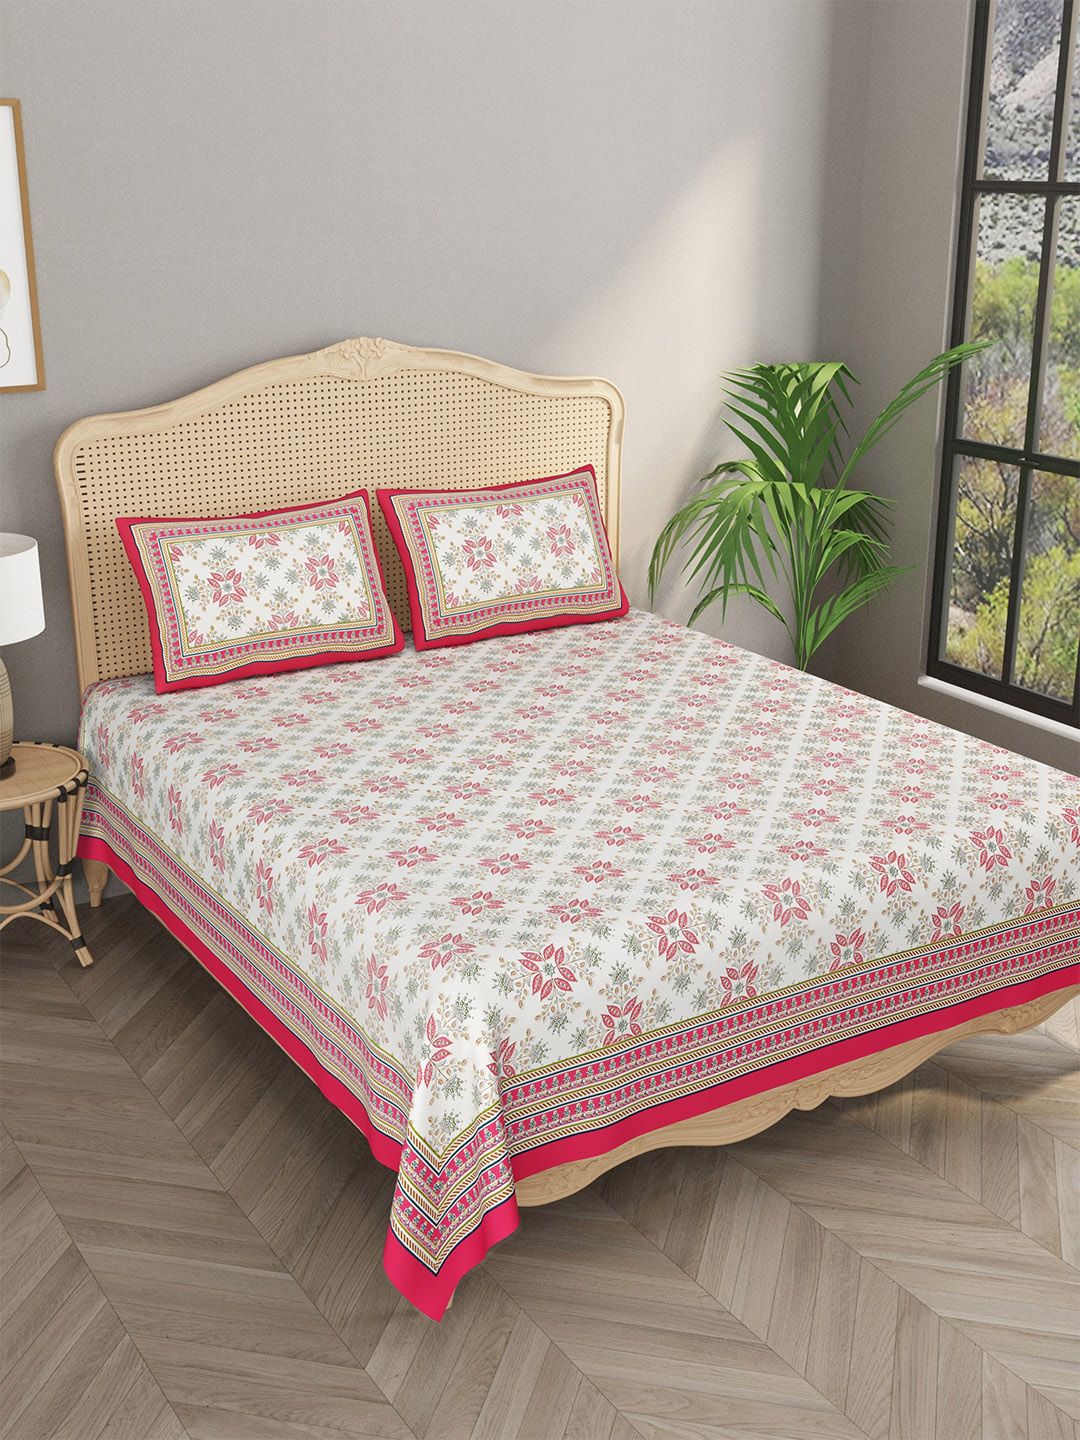 Gulaab Jaipur 400 TC Floral Print Cotton Superfine King Size Bedsheet With 2 Pillow Covers Price in India